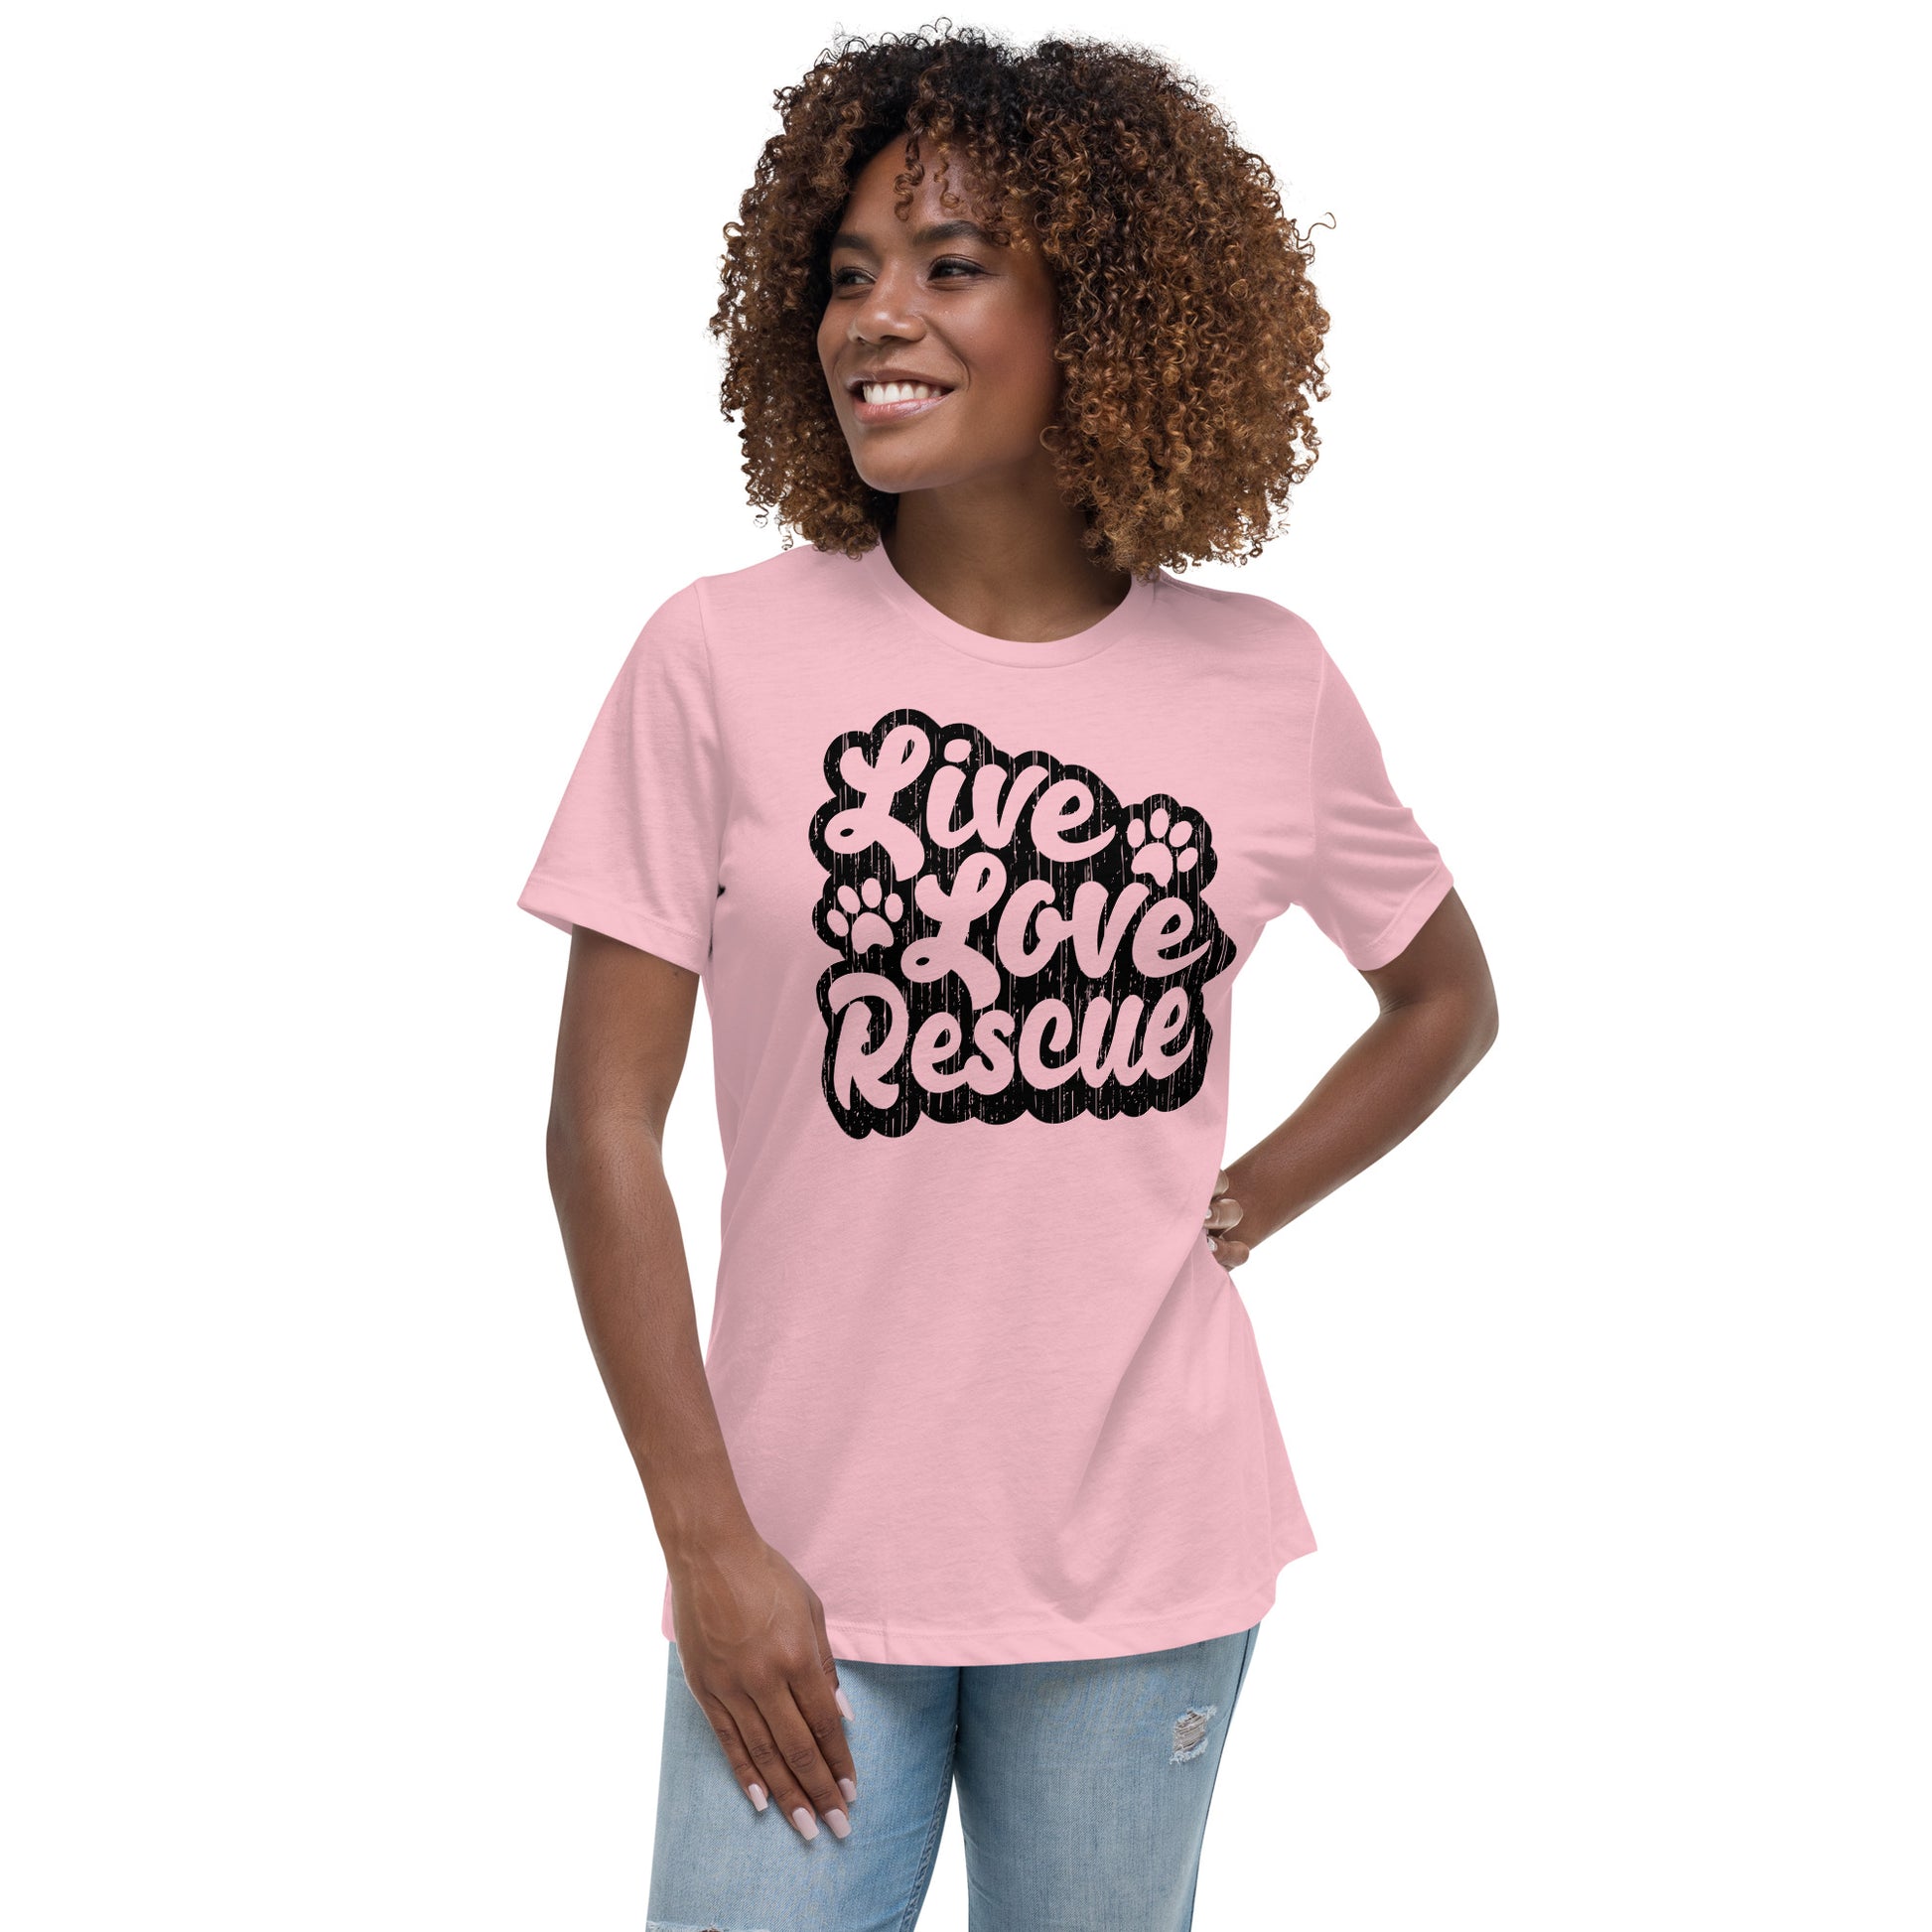 Live love rescue retro women’s relaxed fit t-shirts by Dog Artistry pink color